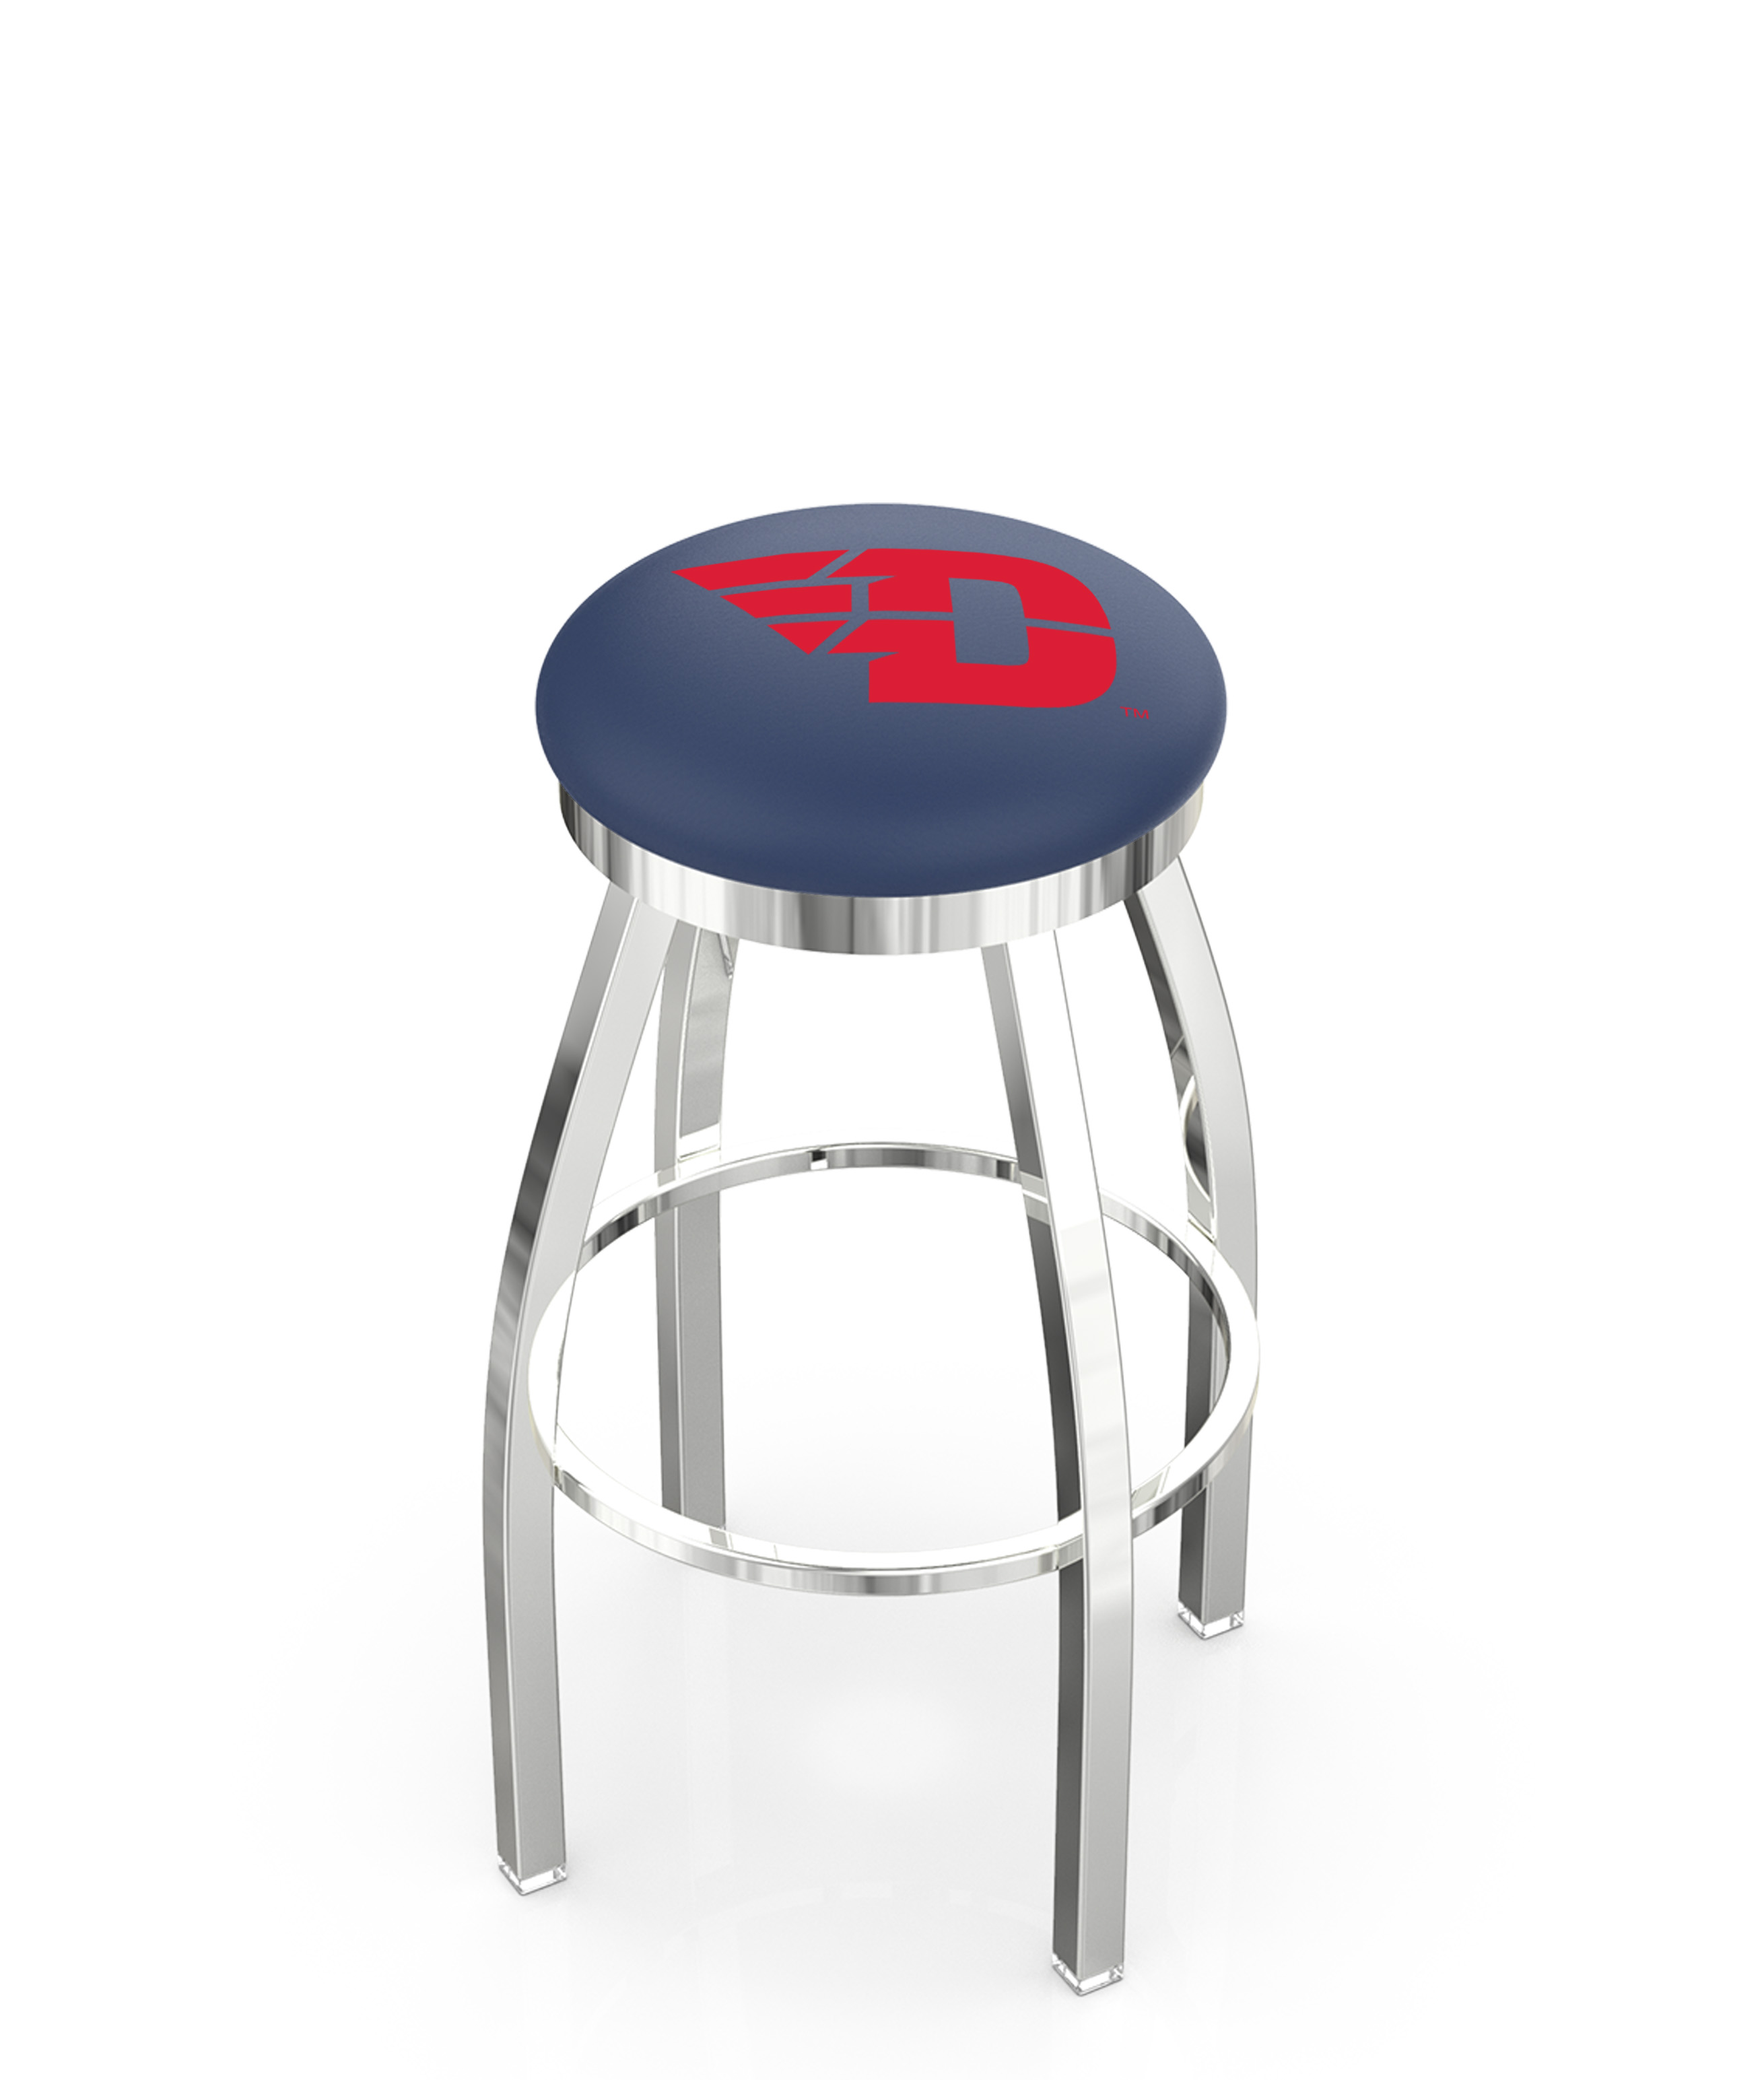 Picture of Holland Bar Stool L8C2C36DytnUn 36 in. Dayton Bar Stool with Flyers Logo Swivel Seat